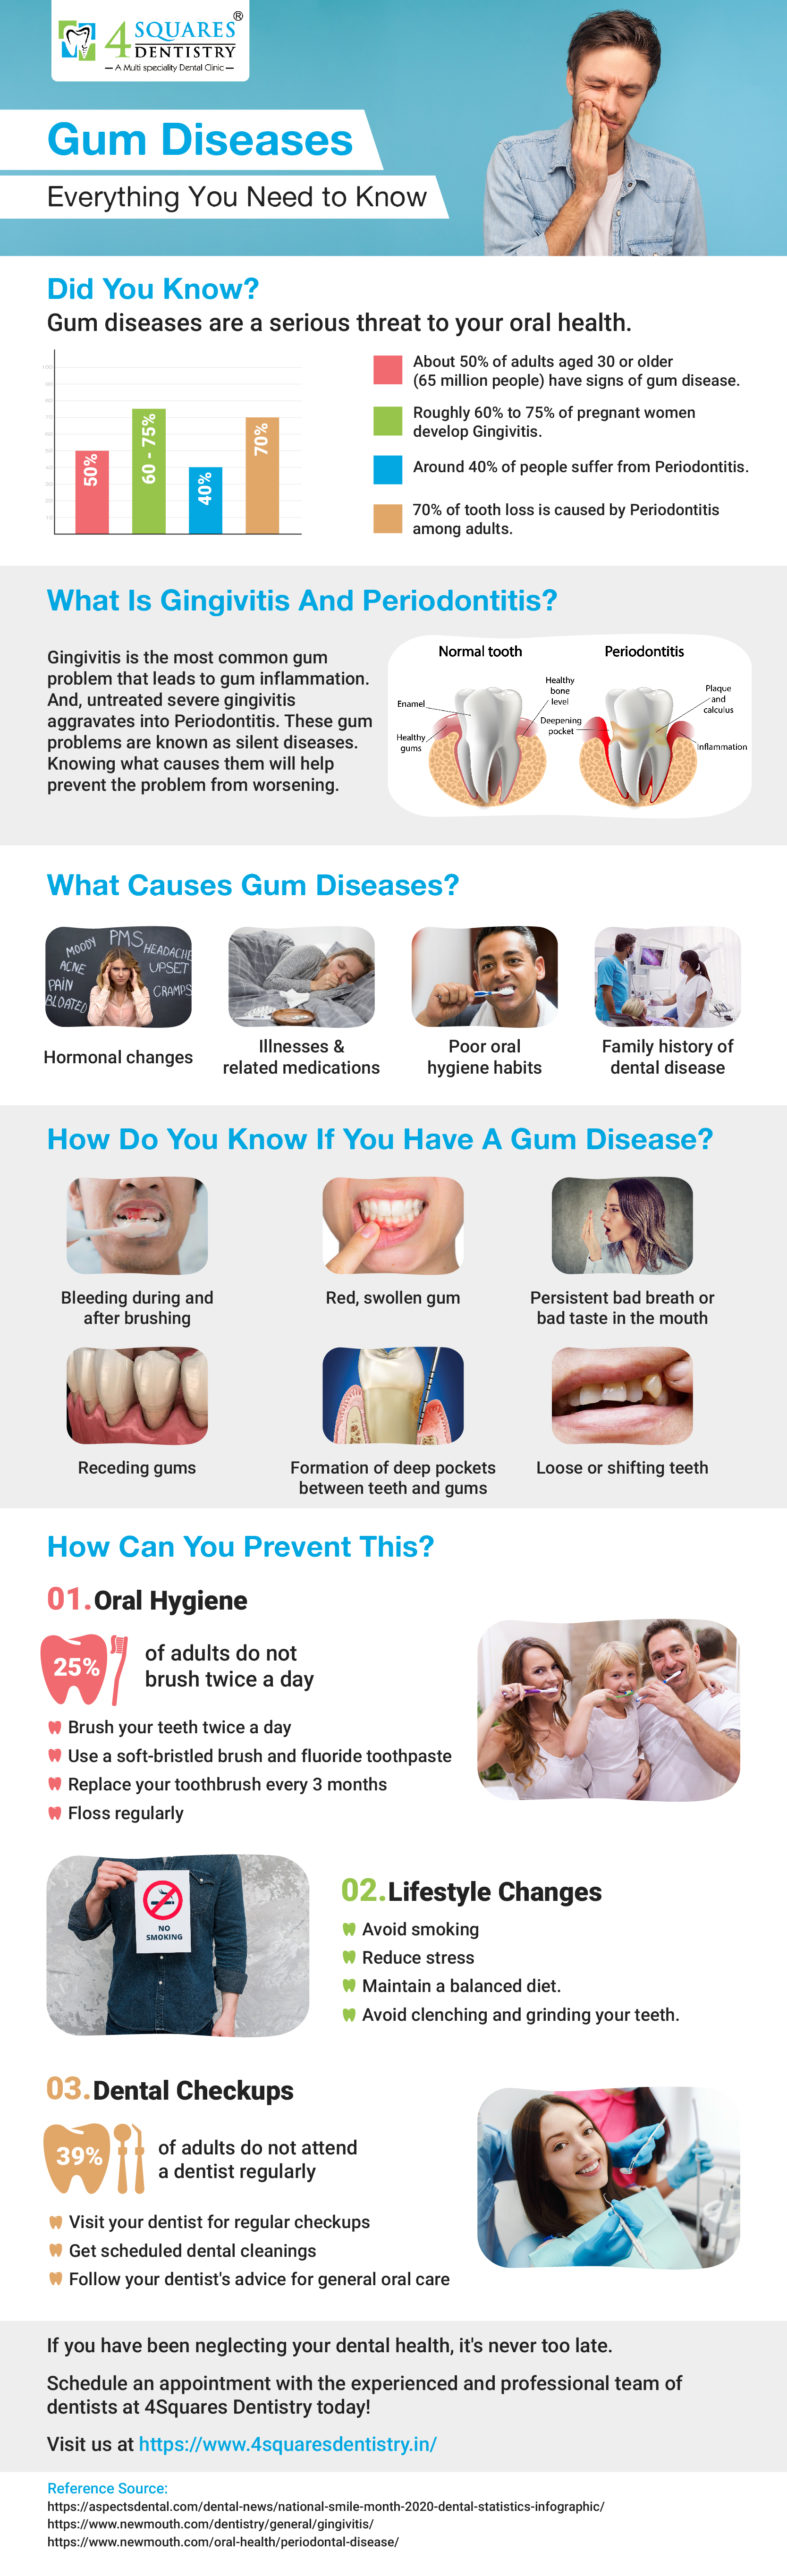 All About Gum Diseases